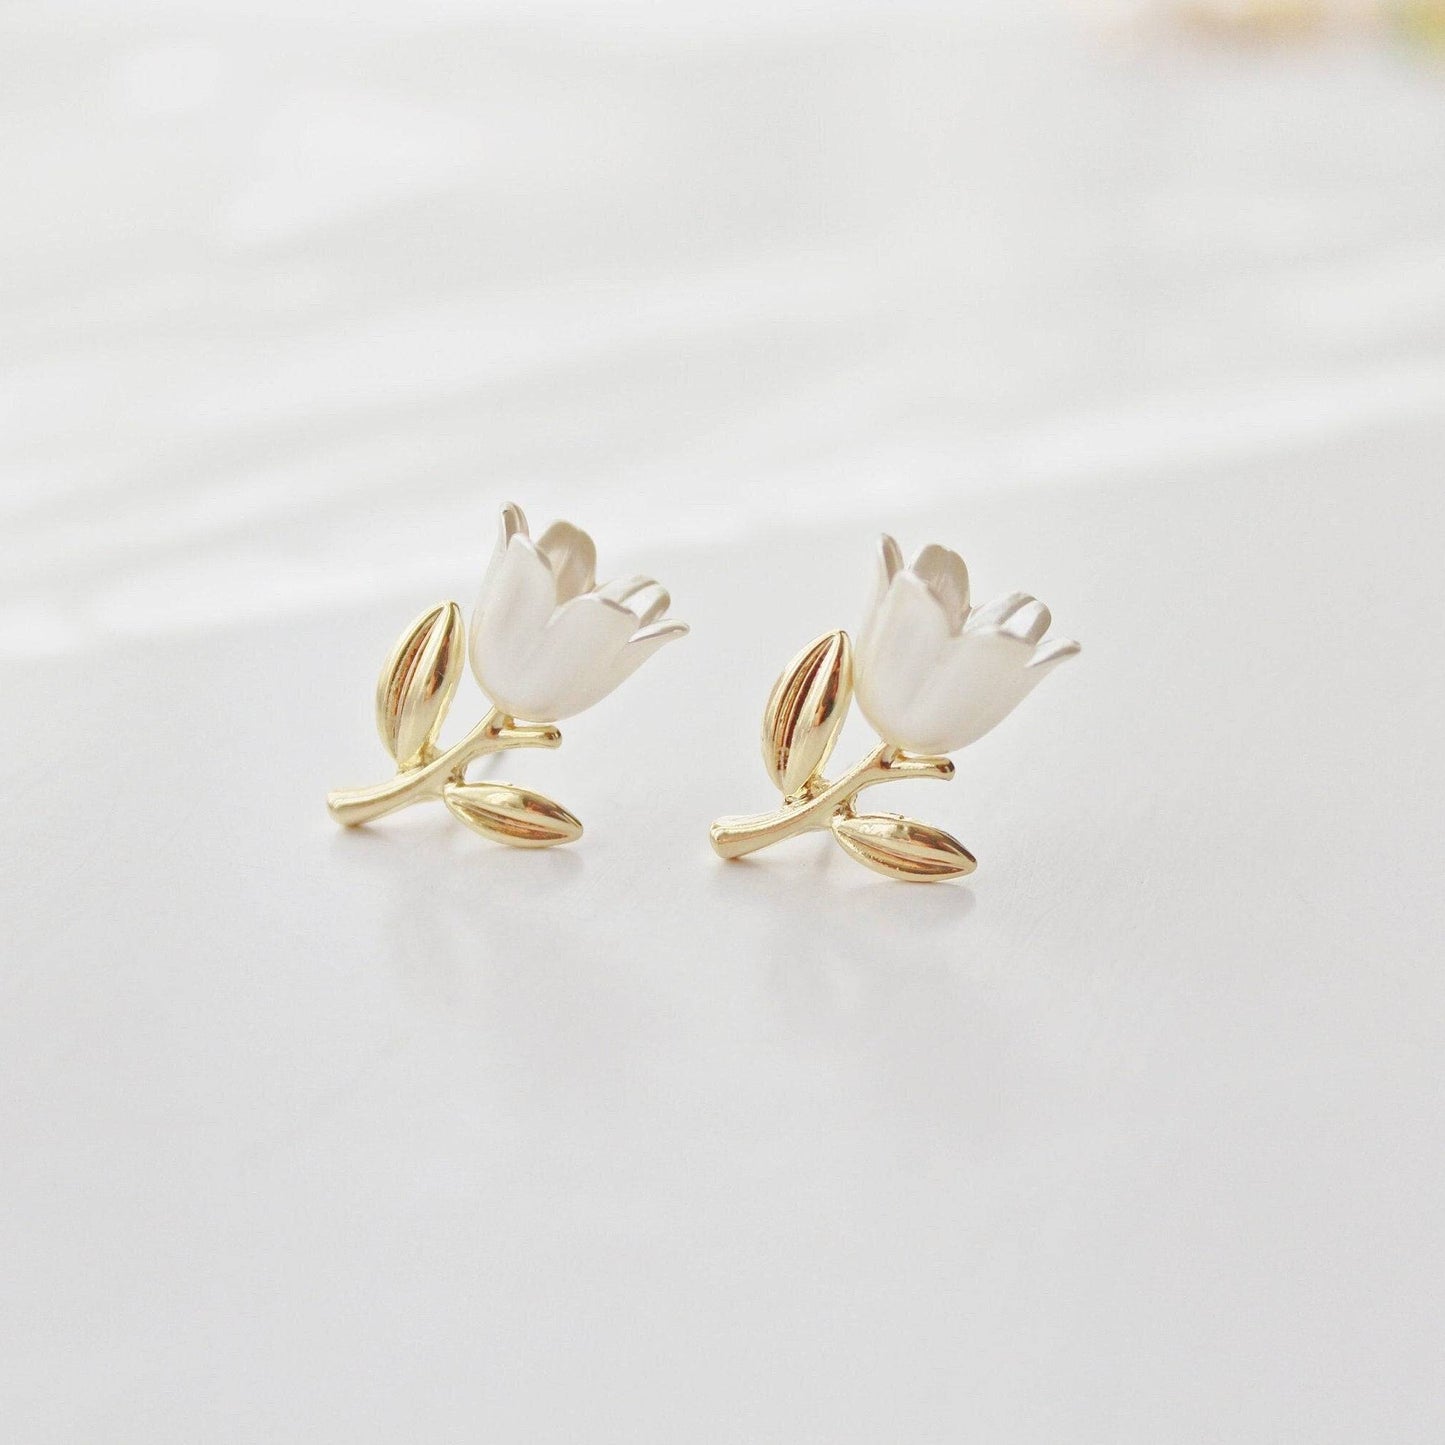 White Tulip Earrings - Silky White Flower with Gold Leaves Earrings-Ninaouity